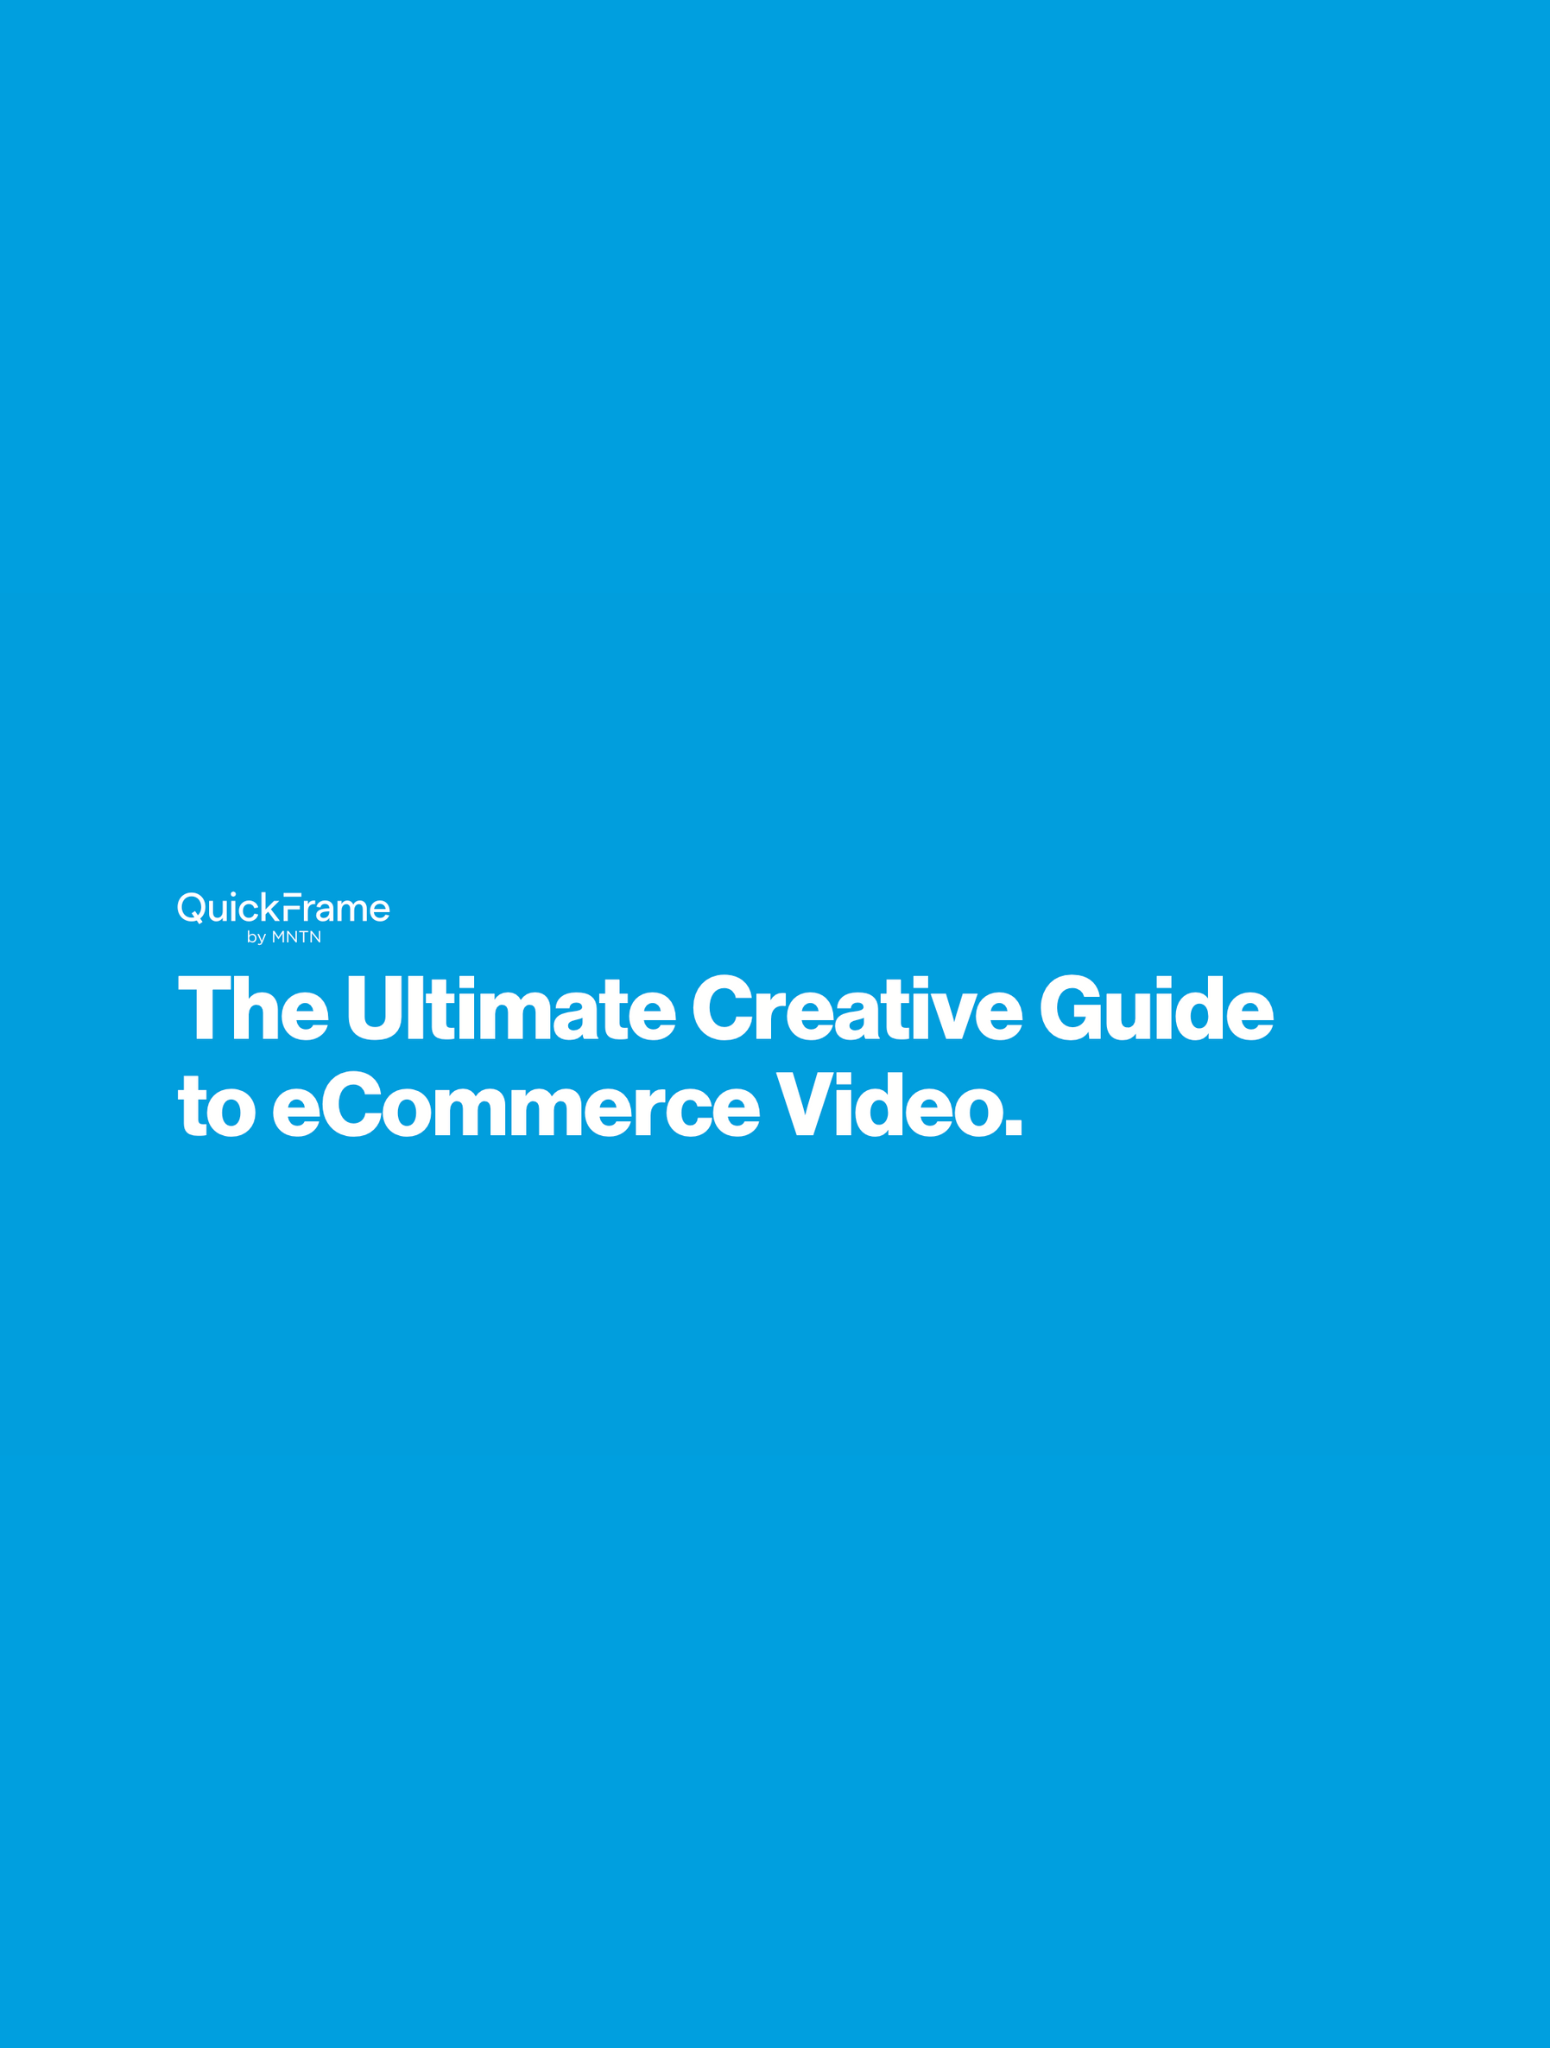 The Ultimate Creative Guide to eCommerce Video